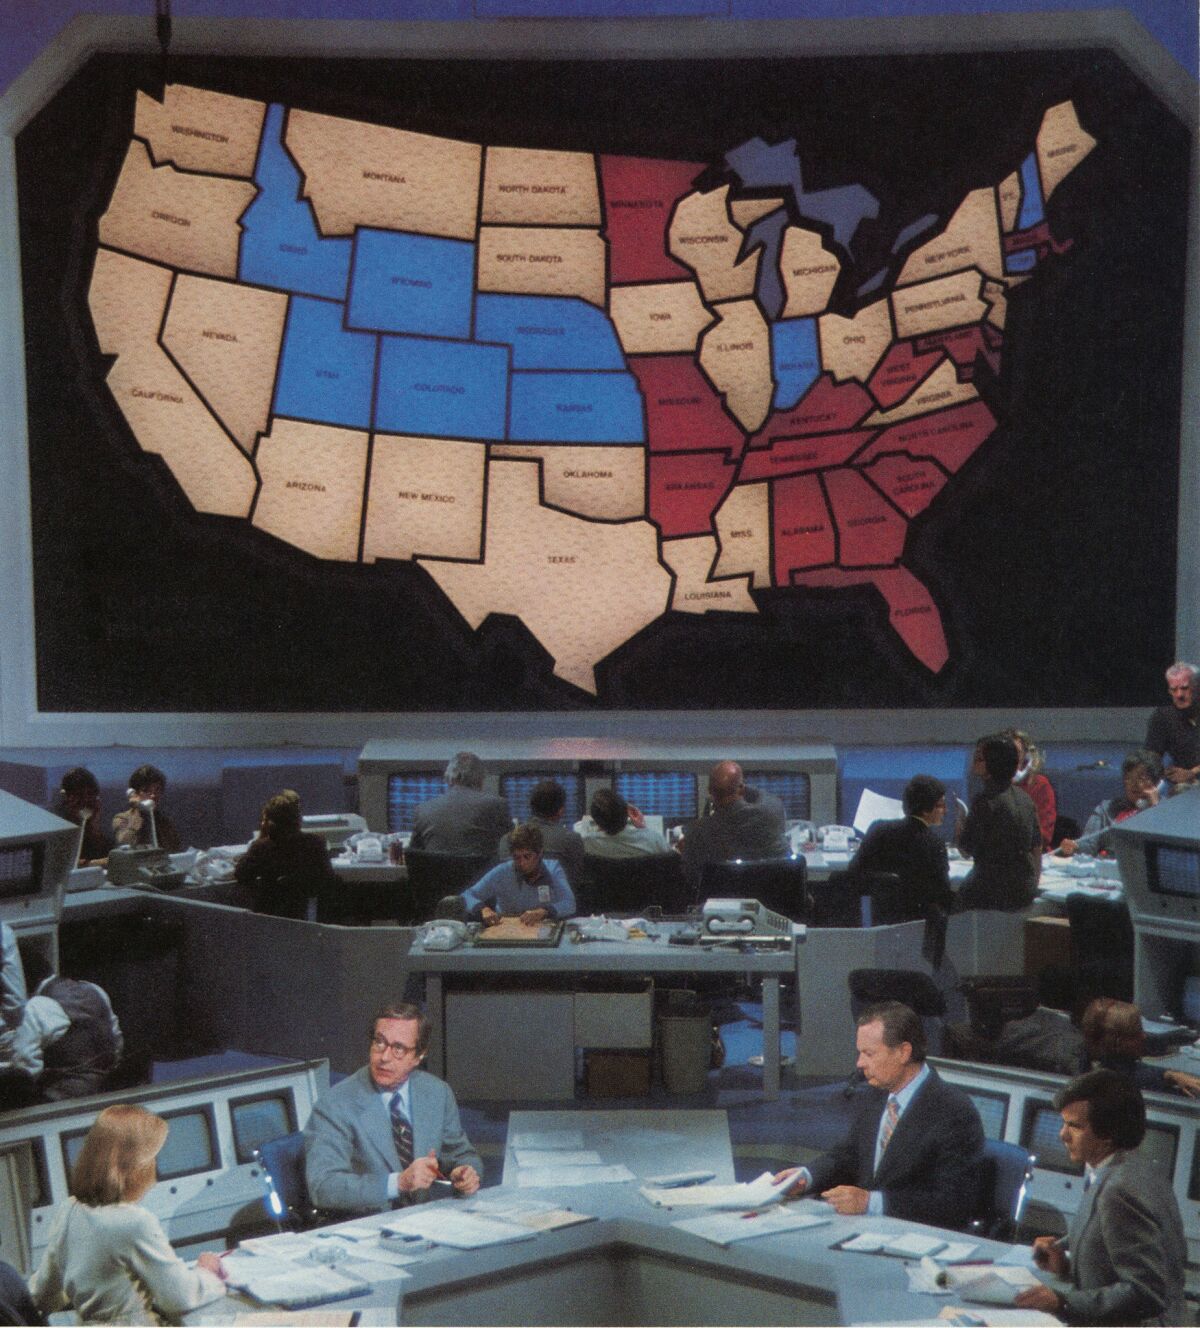 The original NBC electoral map, first seen on Nov. 2, 1976. Pictured, from left, Cassie Mackin, John Chancellor, David Brinkley, and Tom Brokaw. (Indiana Historical Society / NBC)